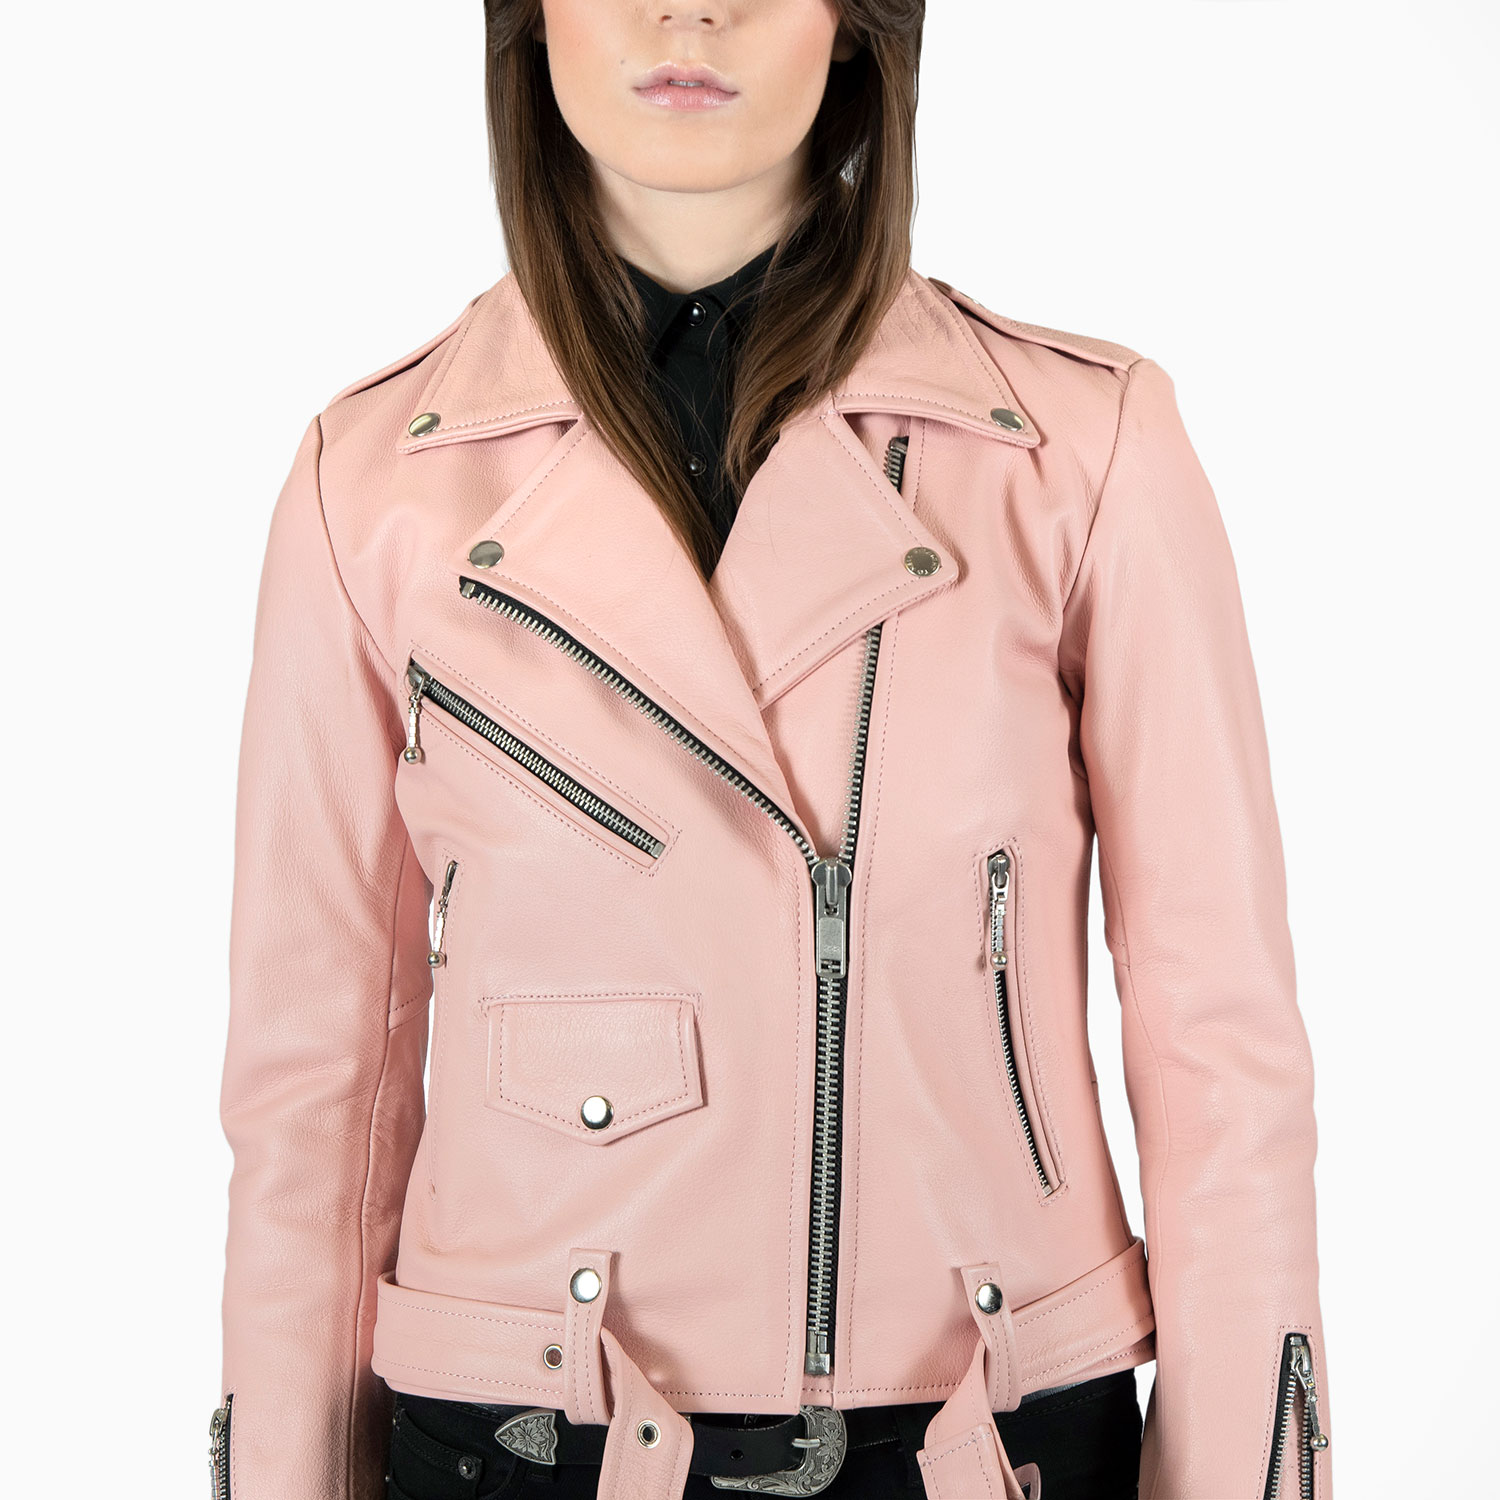 Commando - Dusty 3XL, | (Size Straight S, L, Jacket 4XL) To M, XL, 2XL, Leather Hell Apparel Pink XS